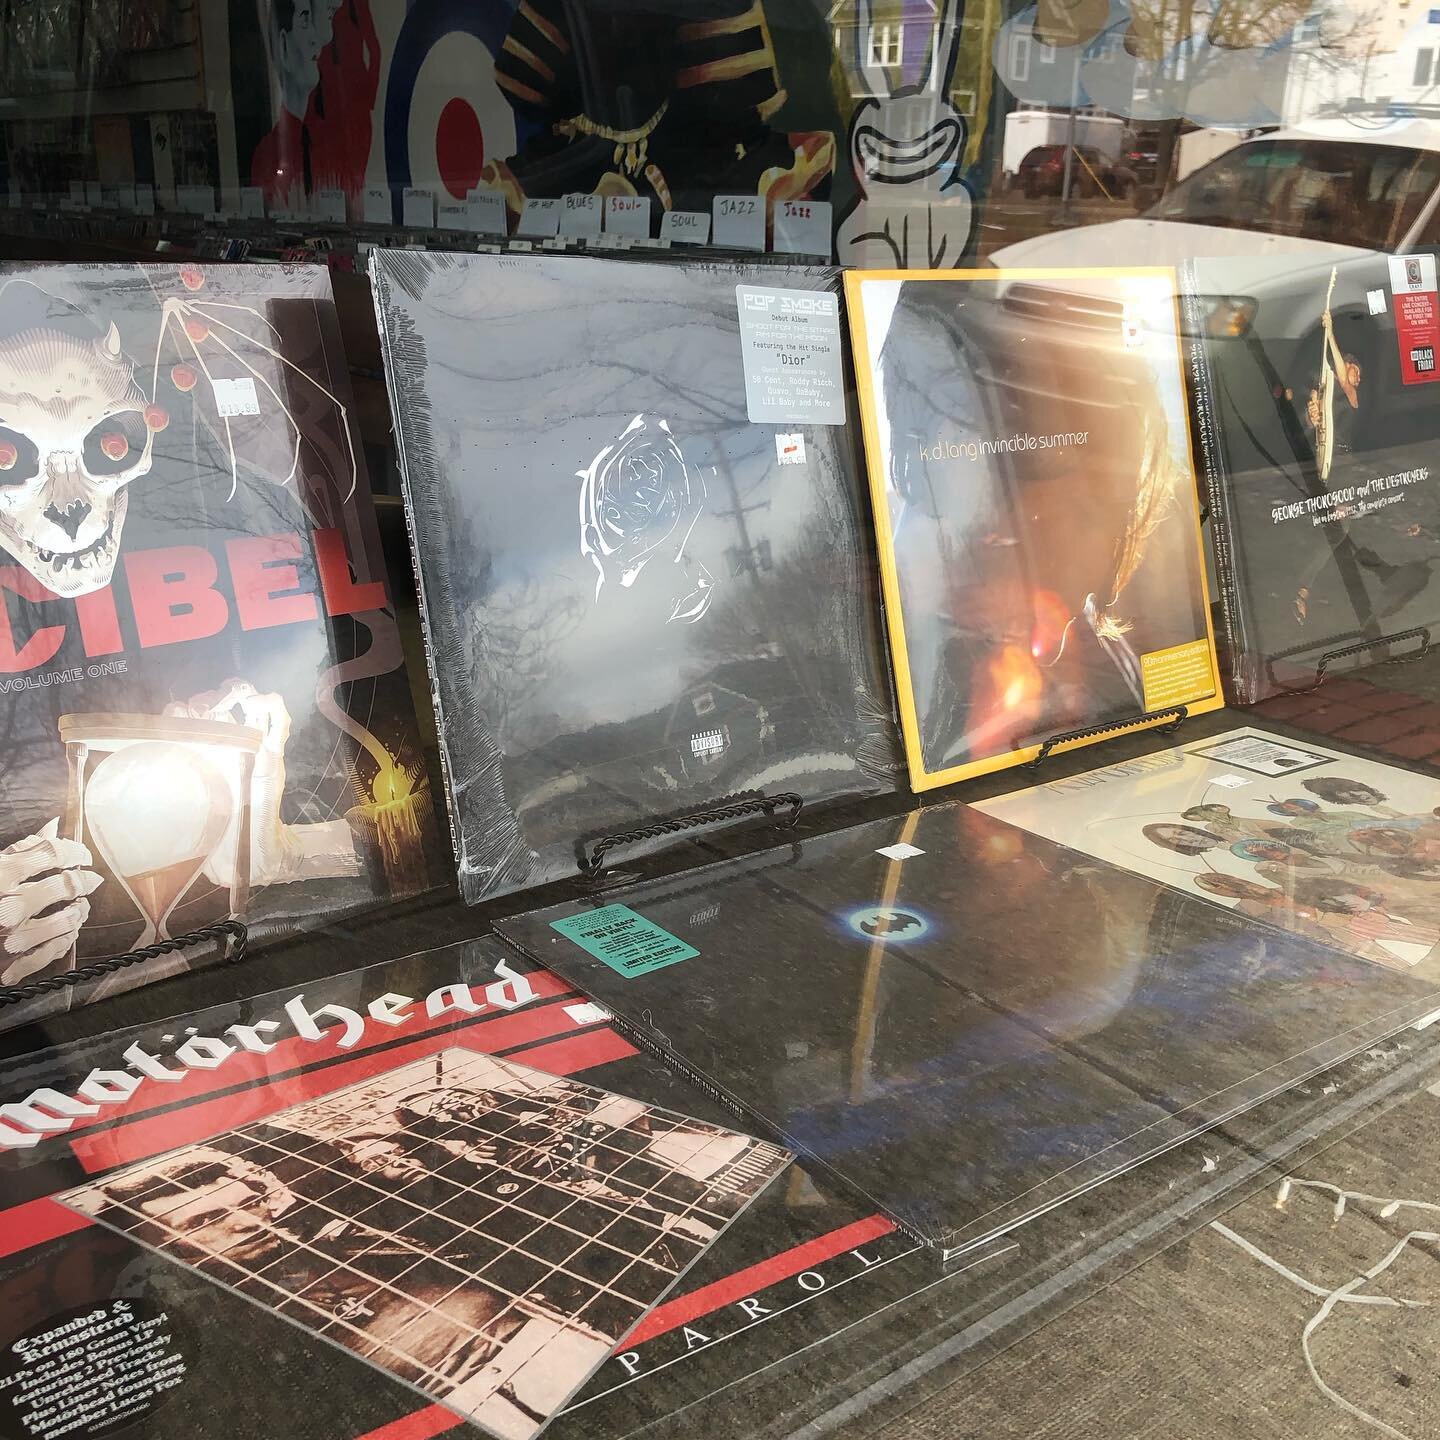 UPDATE: our window display items are now ALWAYS 10% off!!! This will be a rotating set of records each week or bi-weekly that will always be on sale... We will add a fancy sign later this week but just know these window items are always 10% off!!! #n